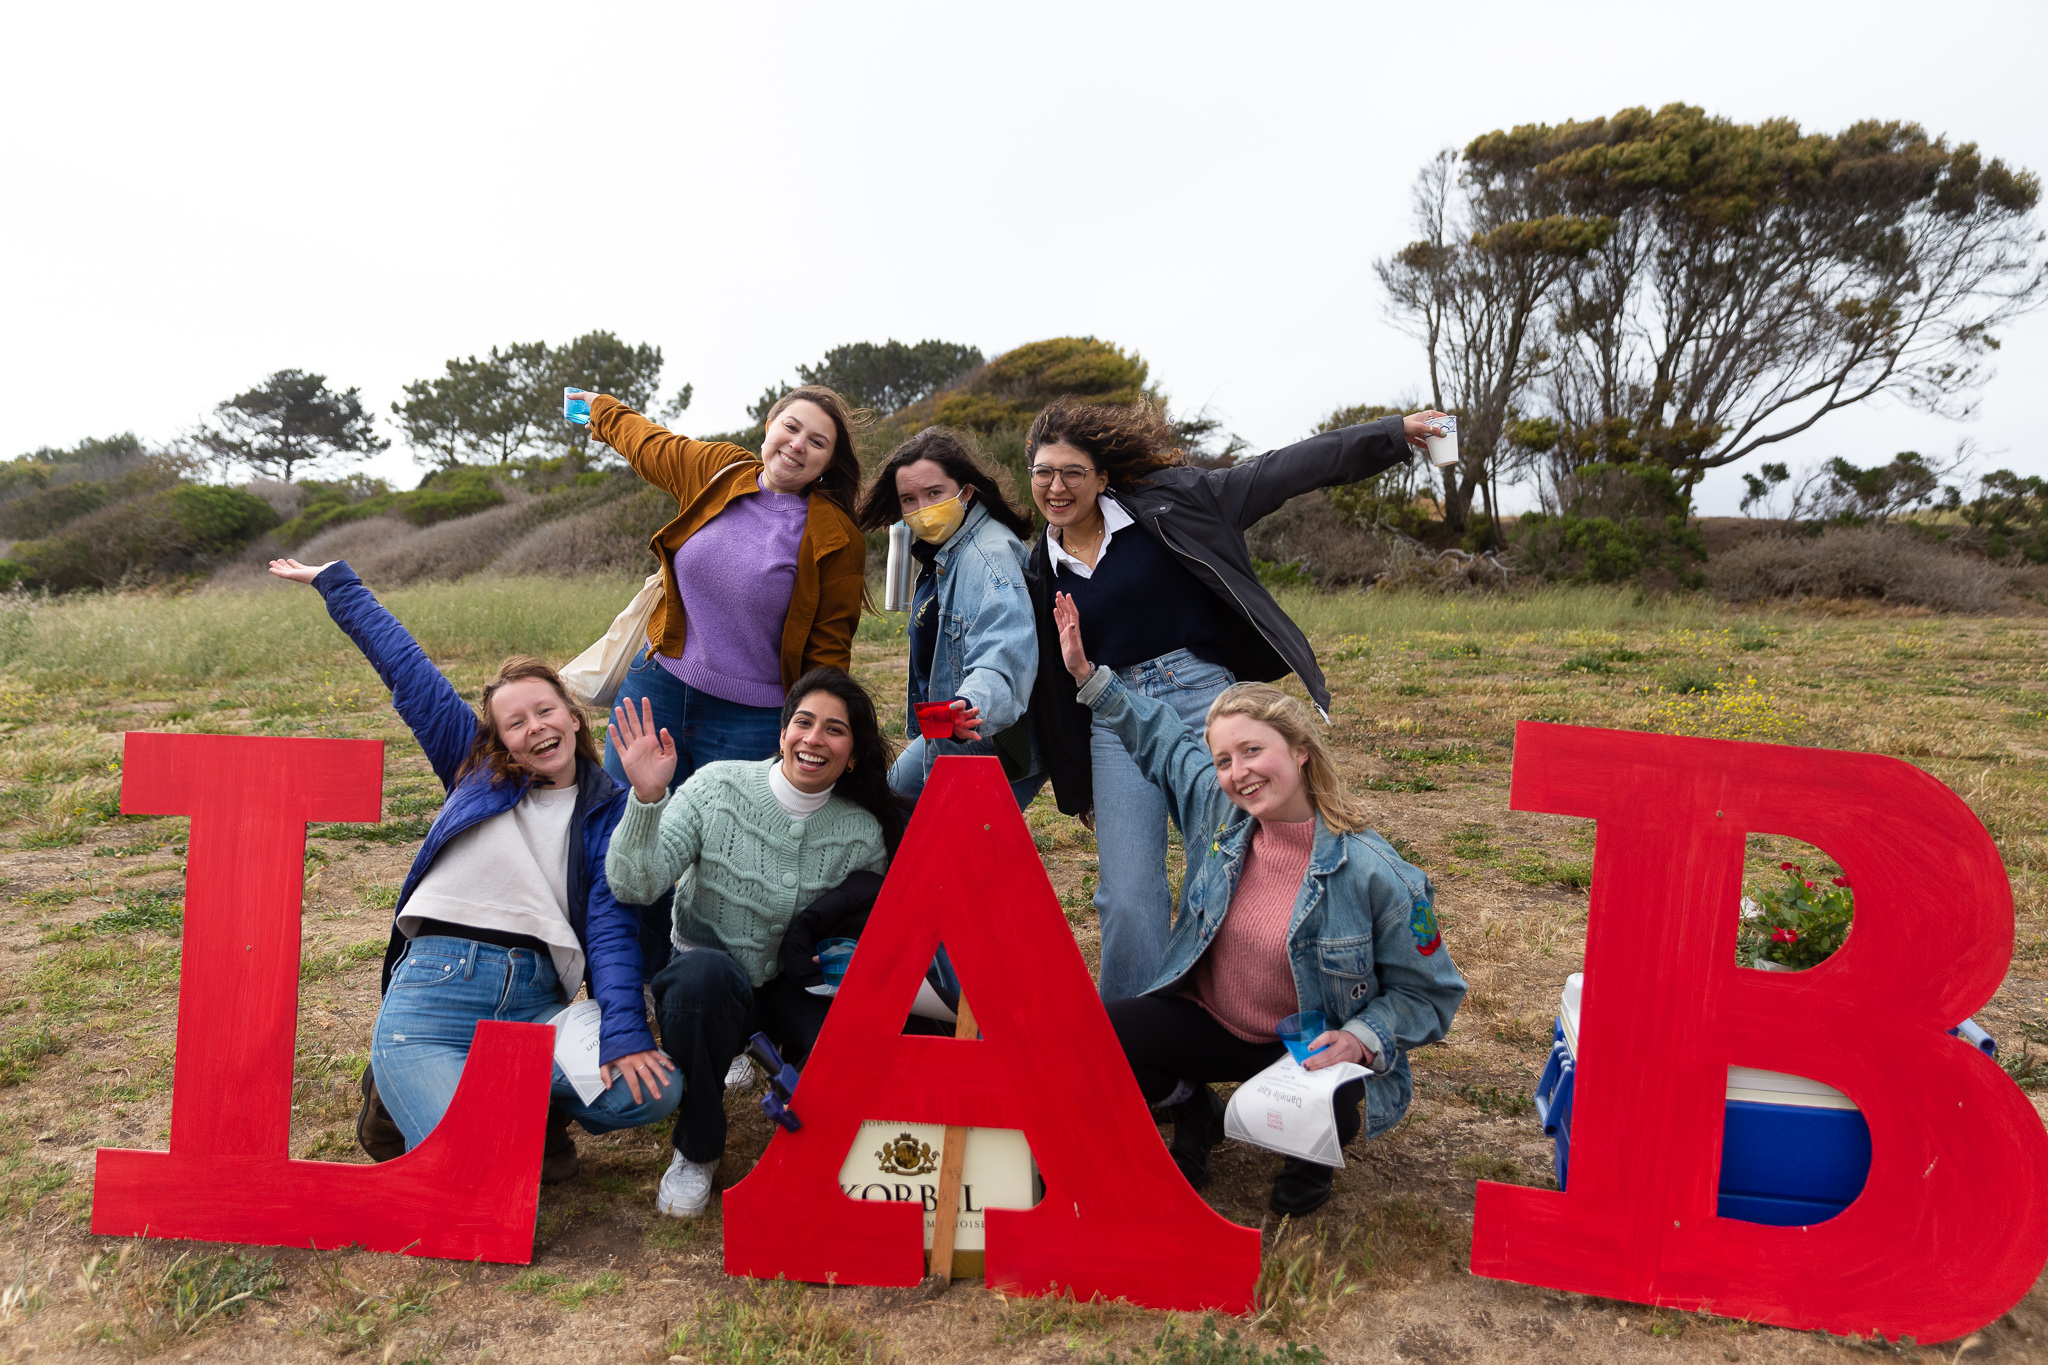 Students cheer while posing outside with giant red letters spelling 